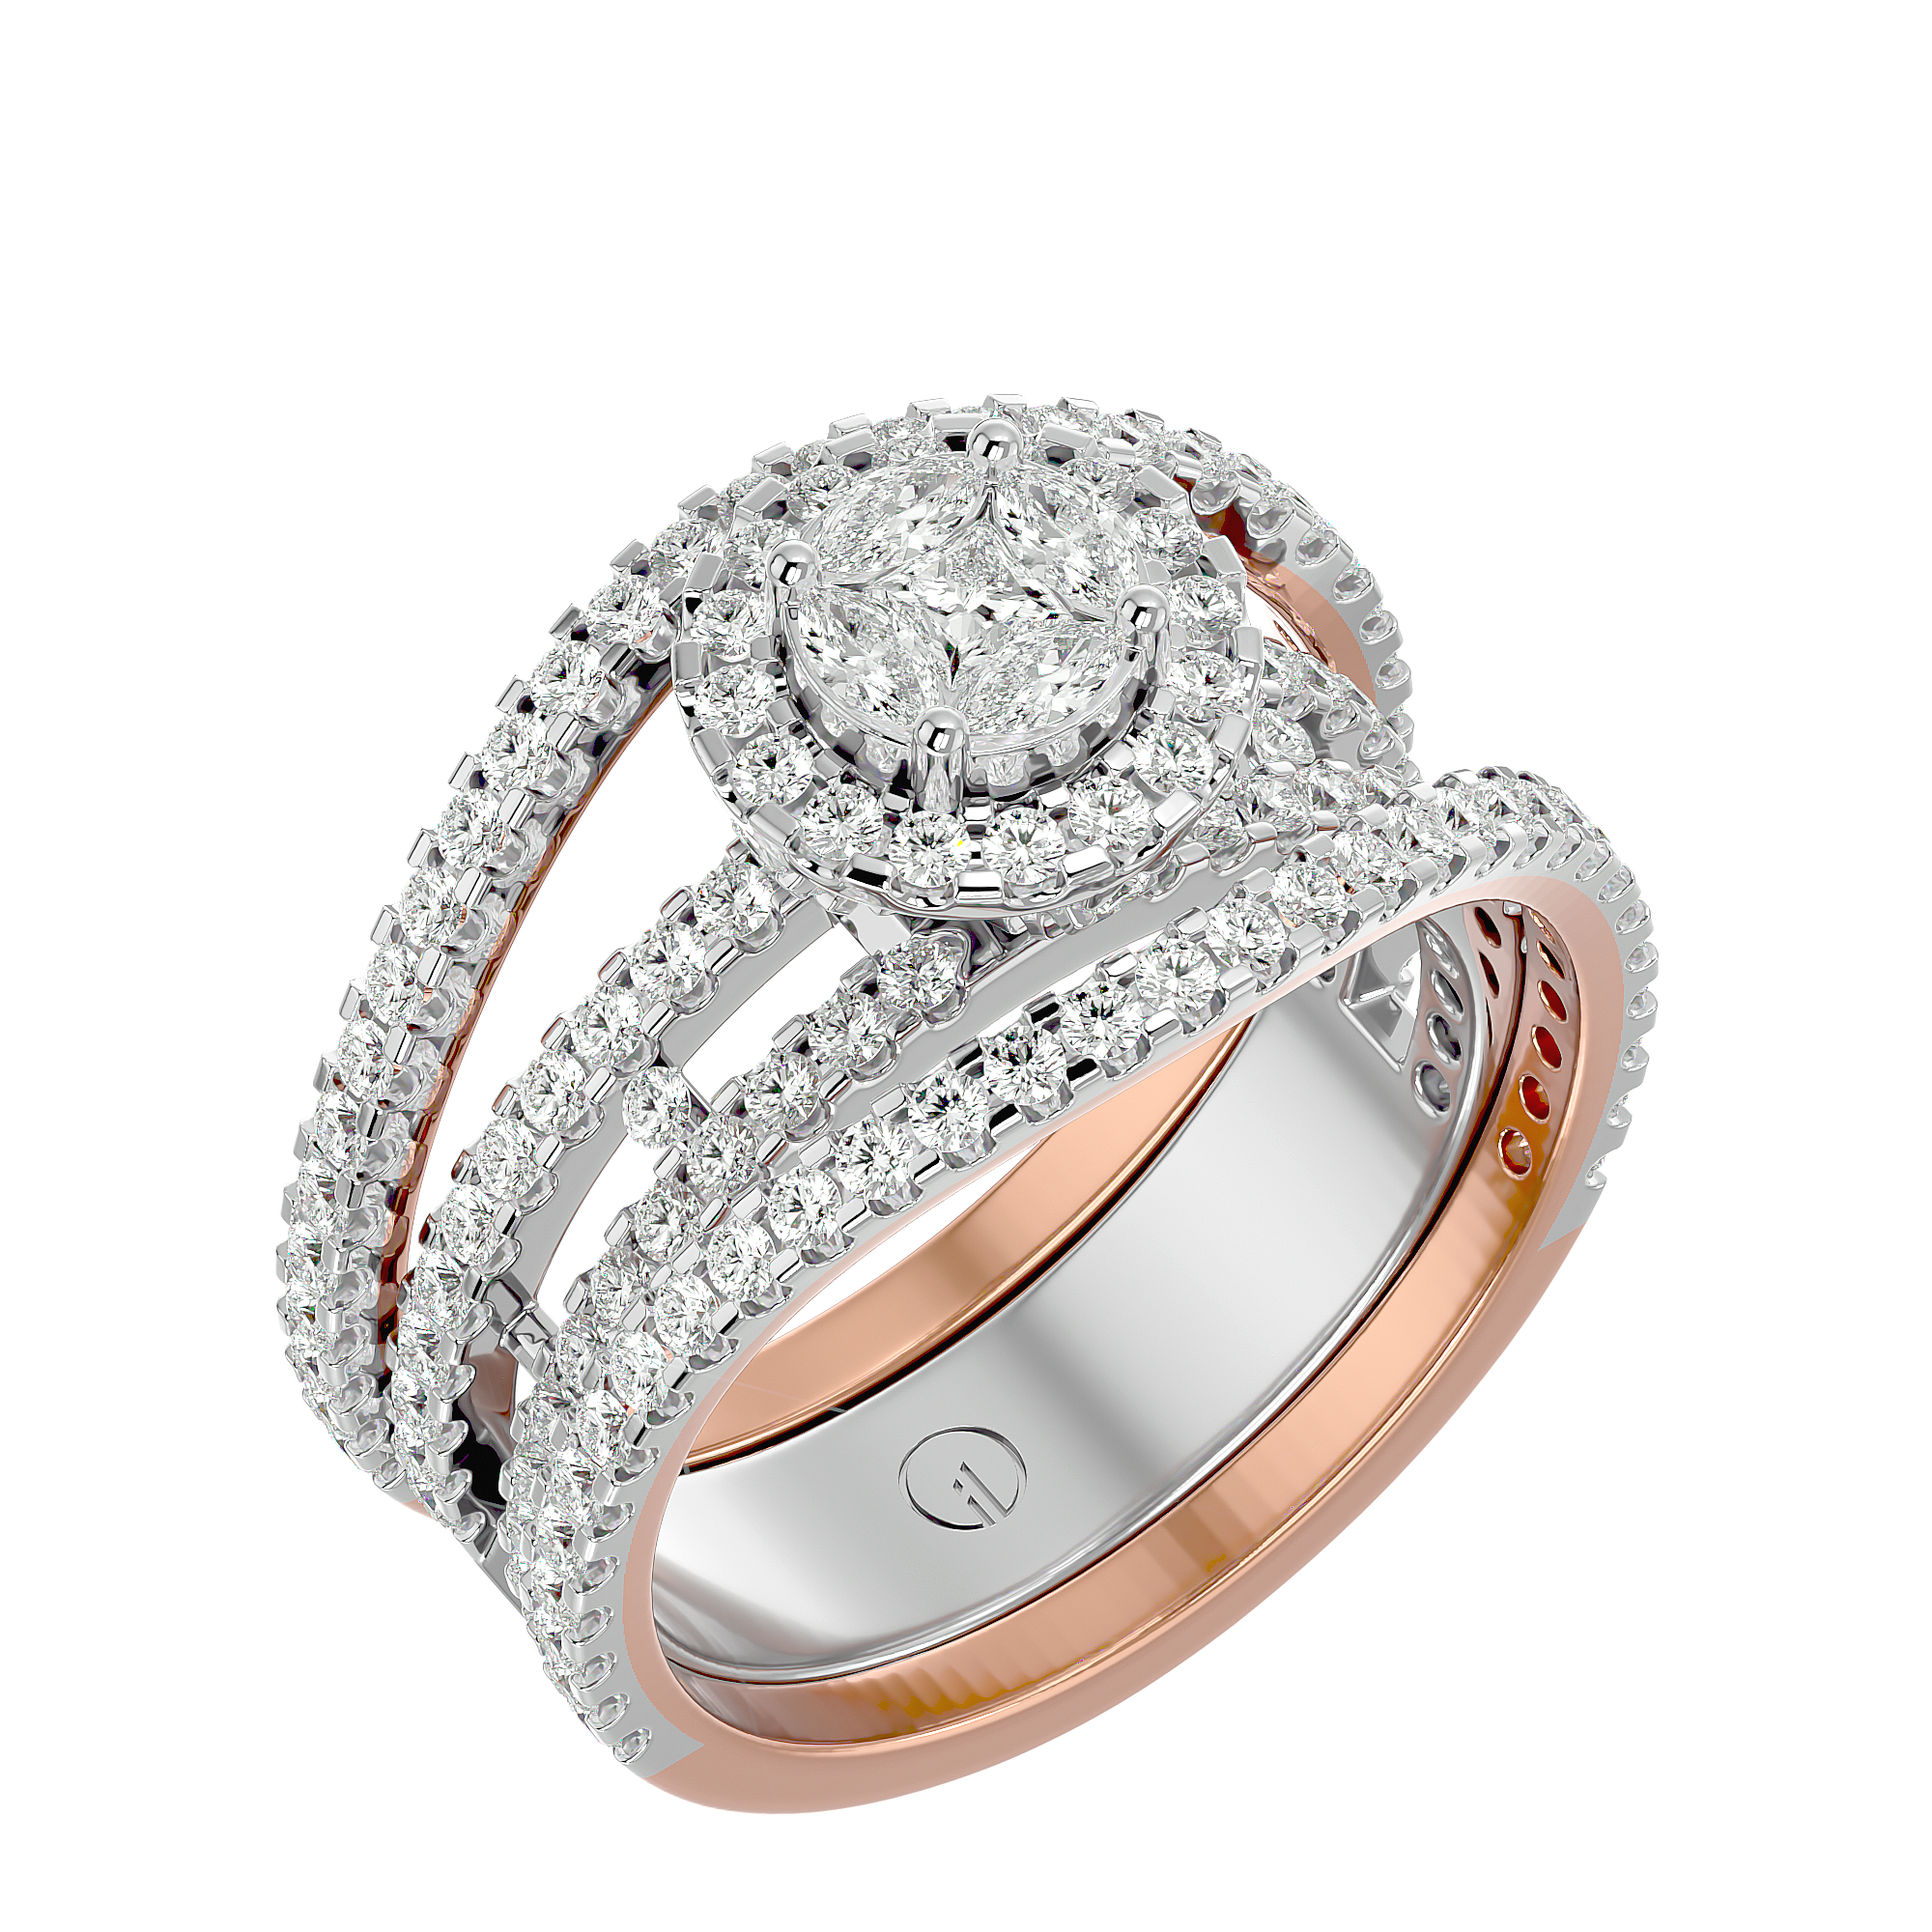 Splendid-Appeal-Solitaire-Illusion-Diamond-Ring-RG2137A-View-01